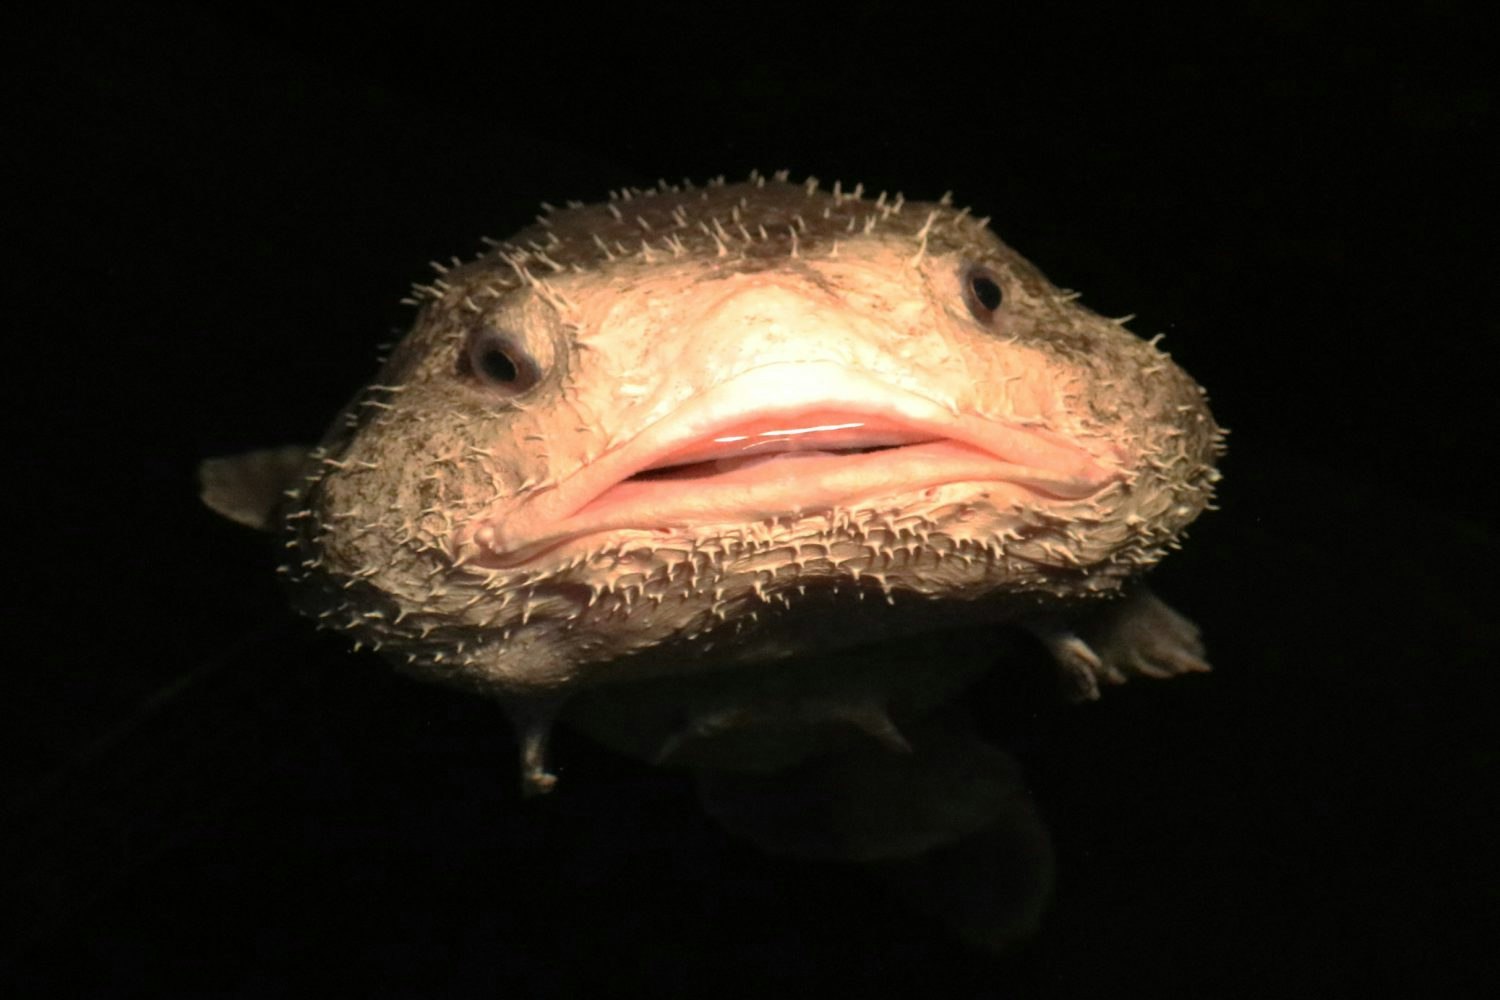 Bob the blobfish is living in a Japanese aquarium - Lonely Planet